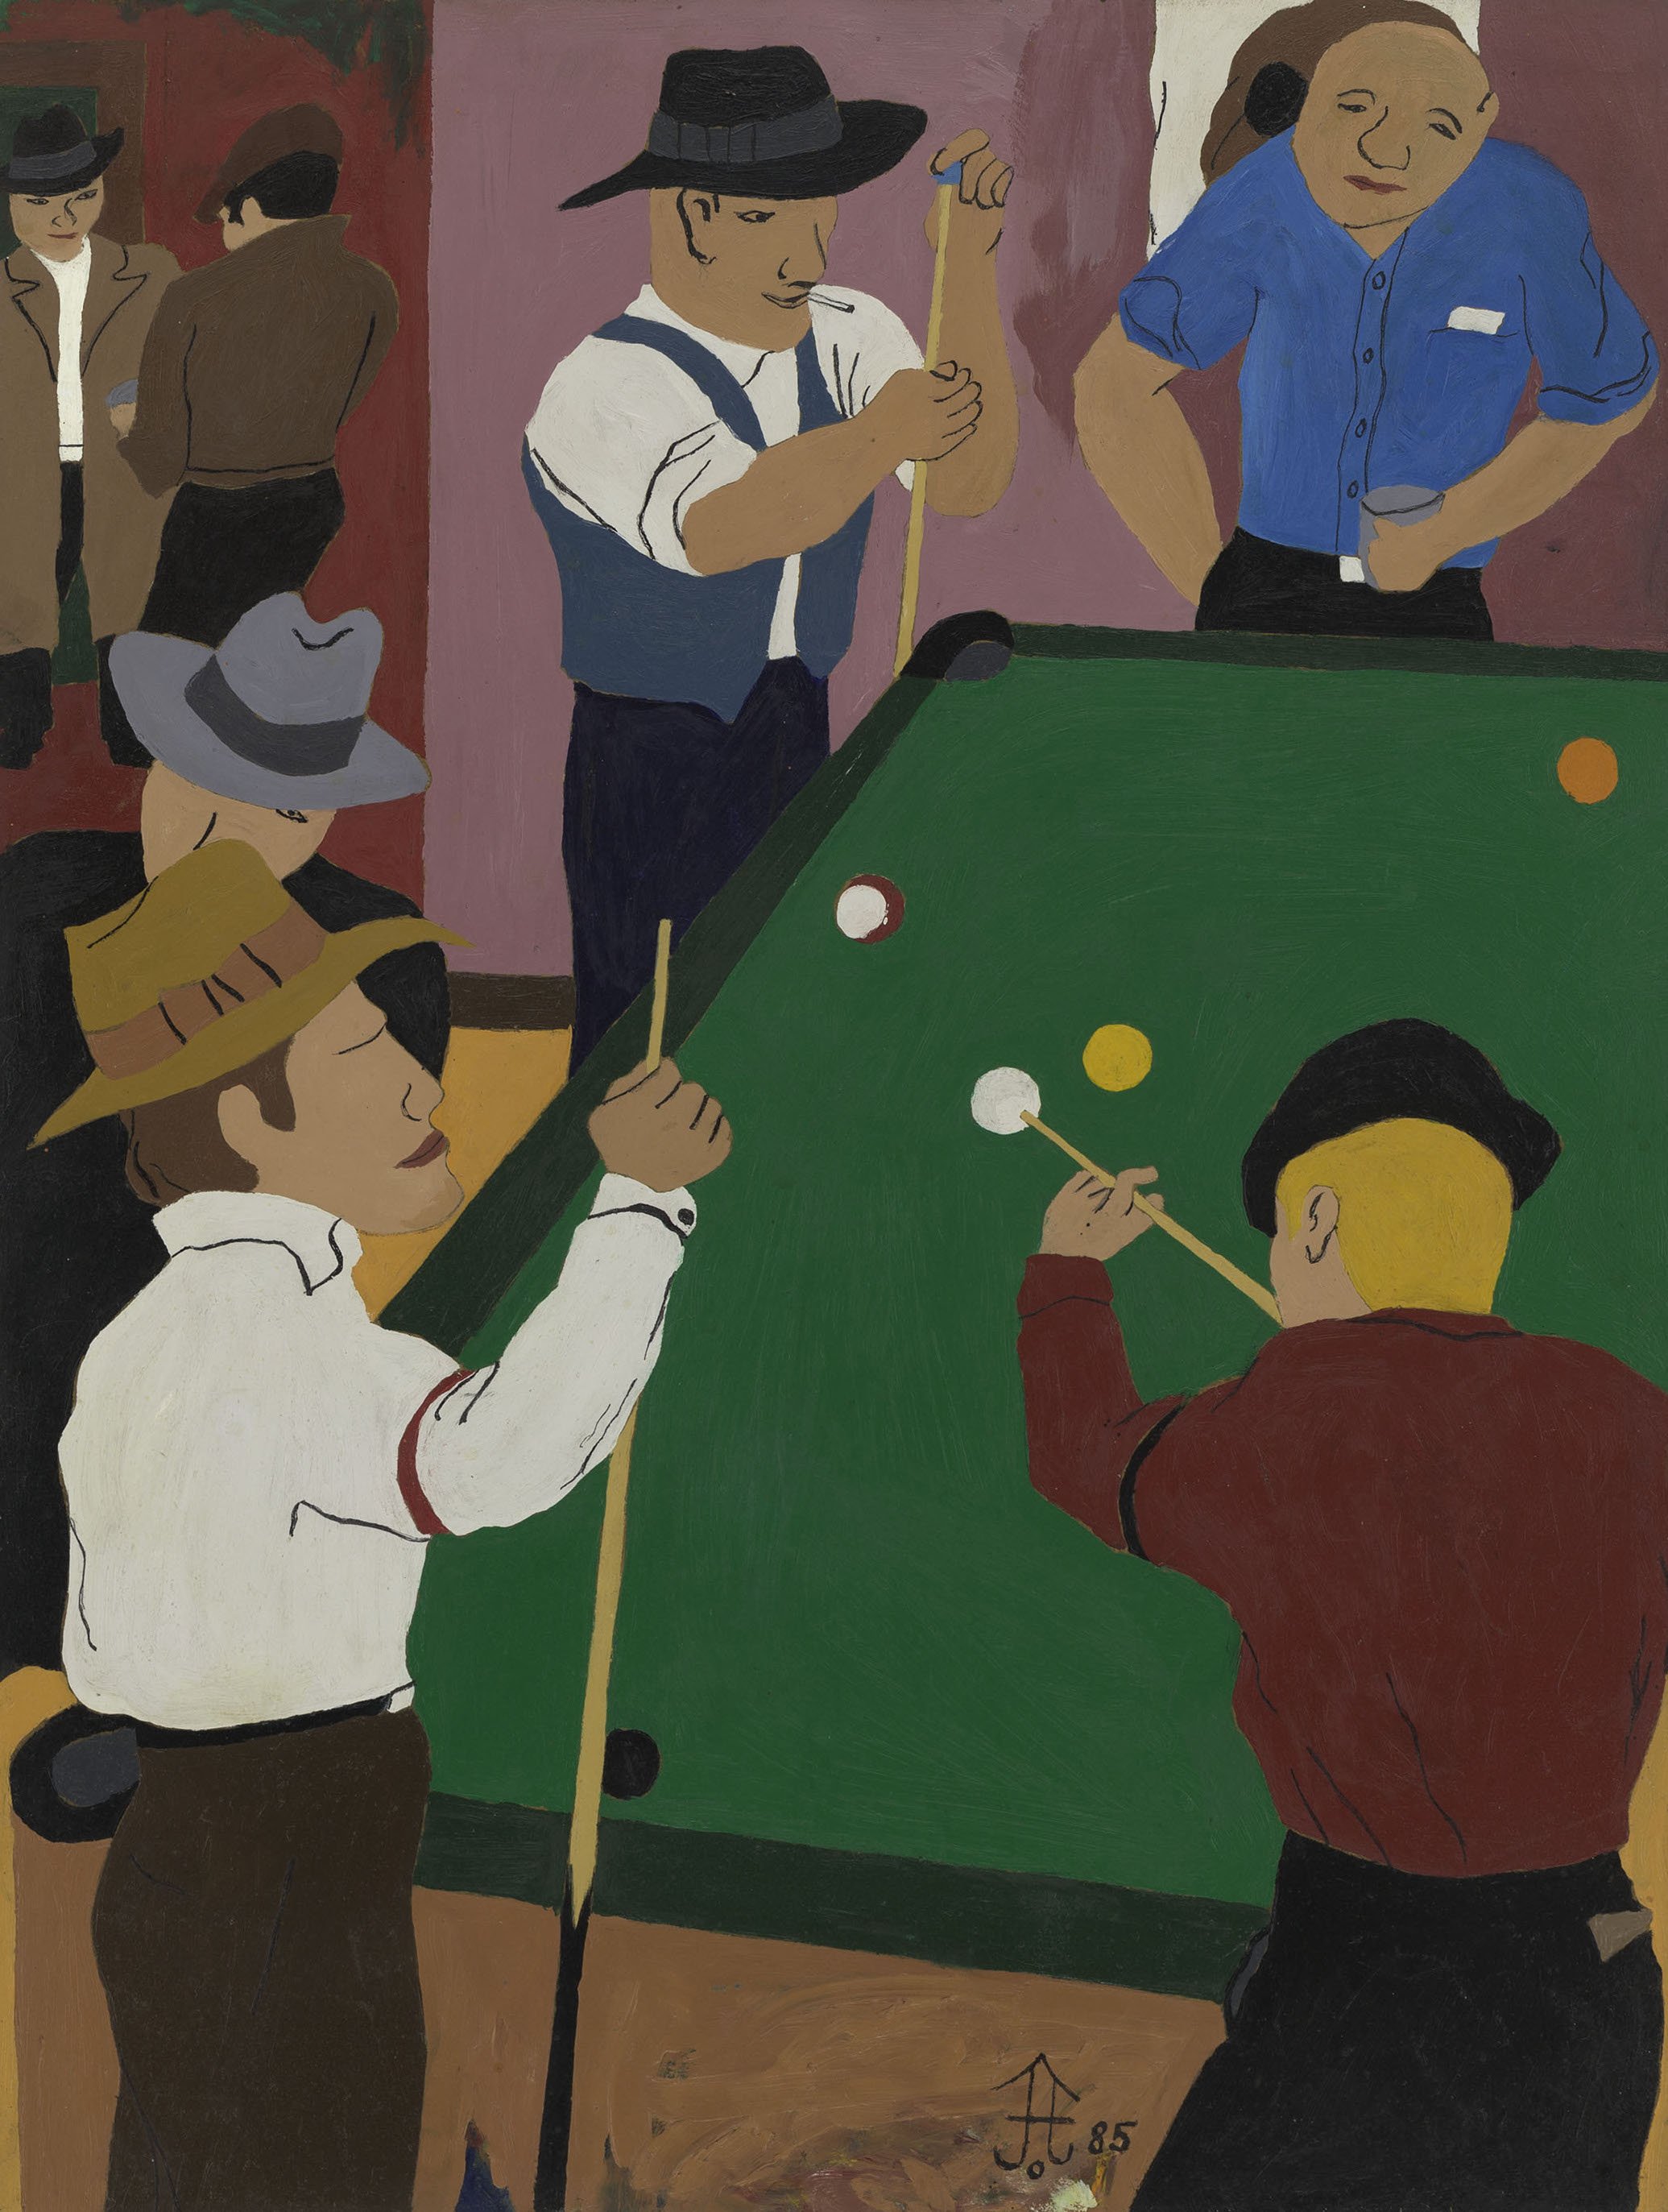 Indoor scene of men in brimmed hats and collared shirts gathered around a green pool table playing pool.